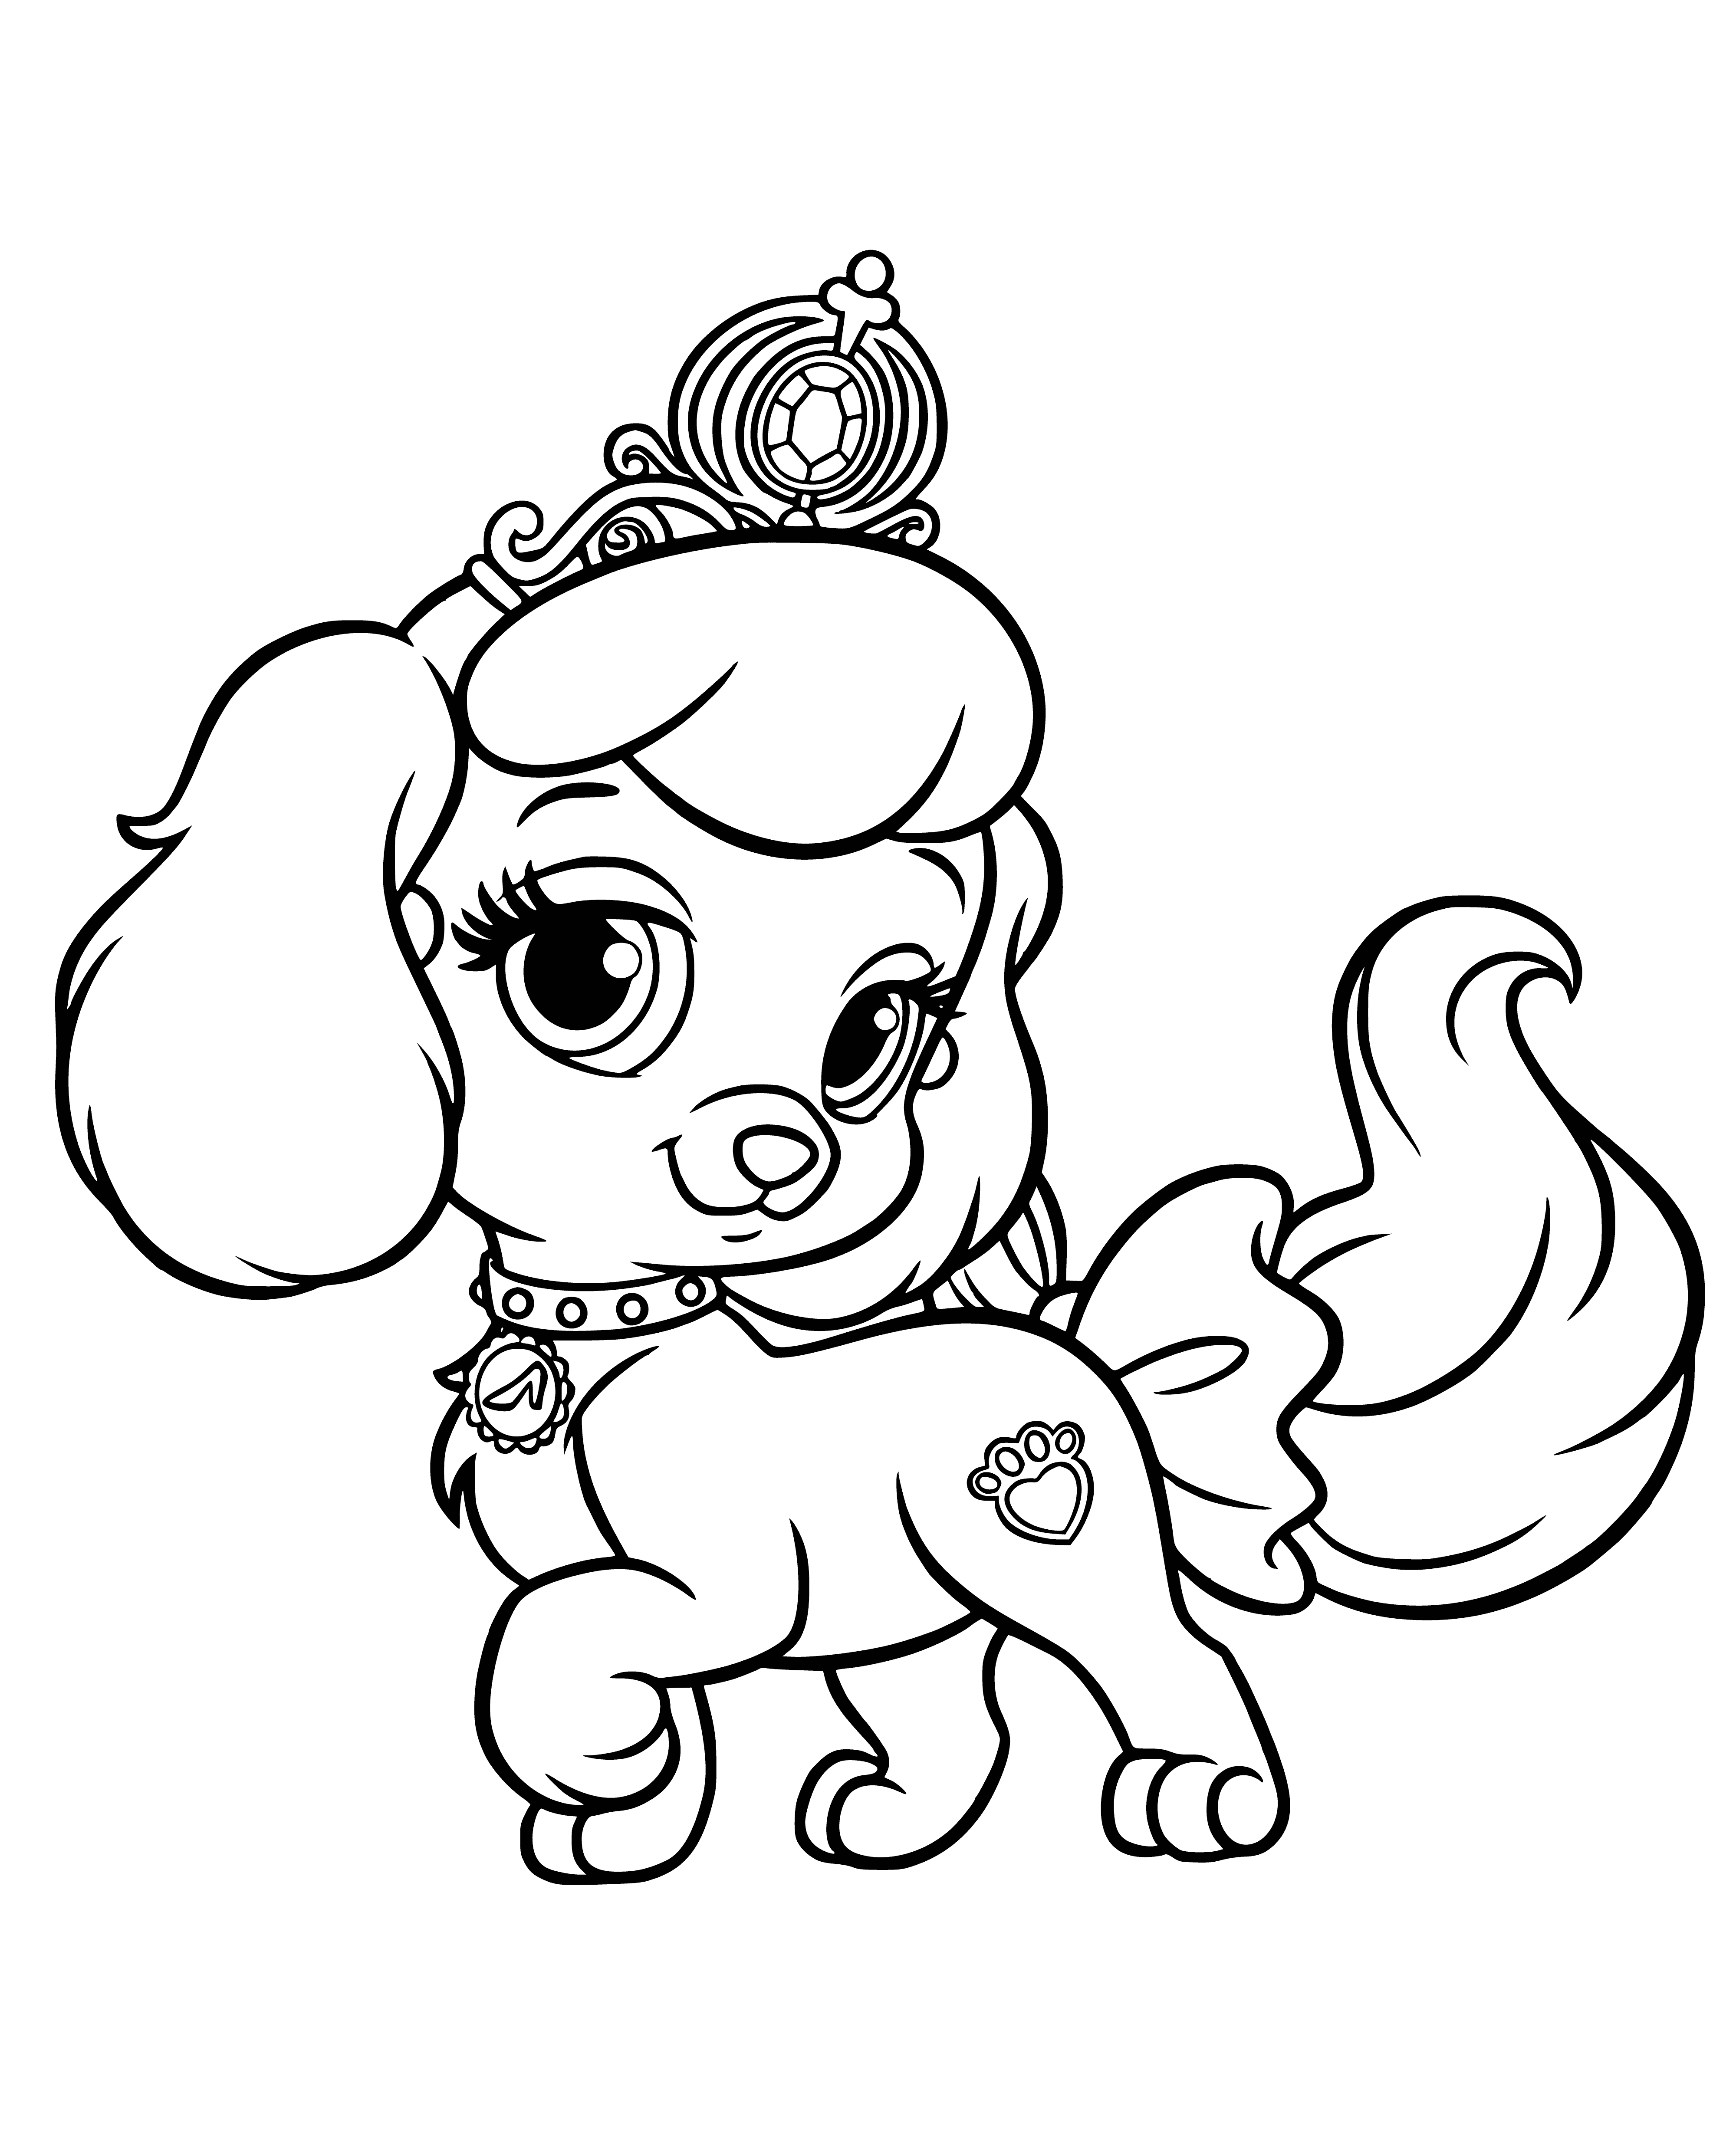 coloring page: Cute pup Pumpkin has bow & sits on carpet.